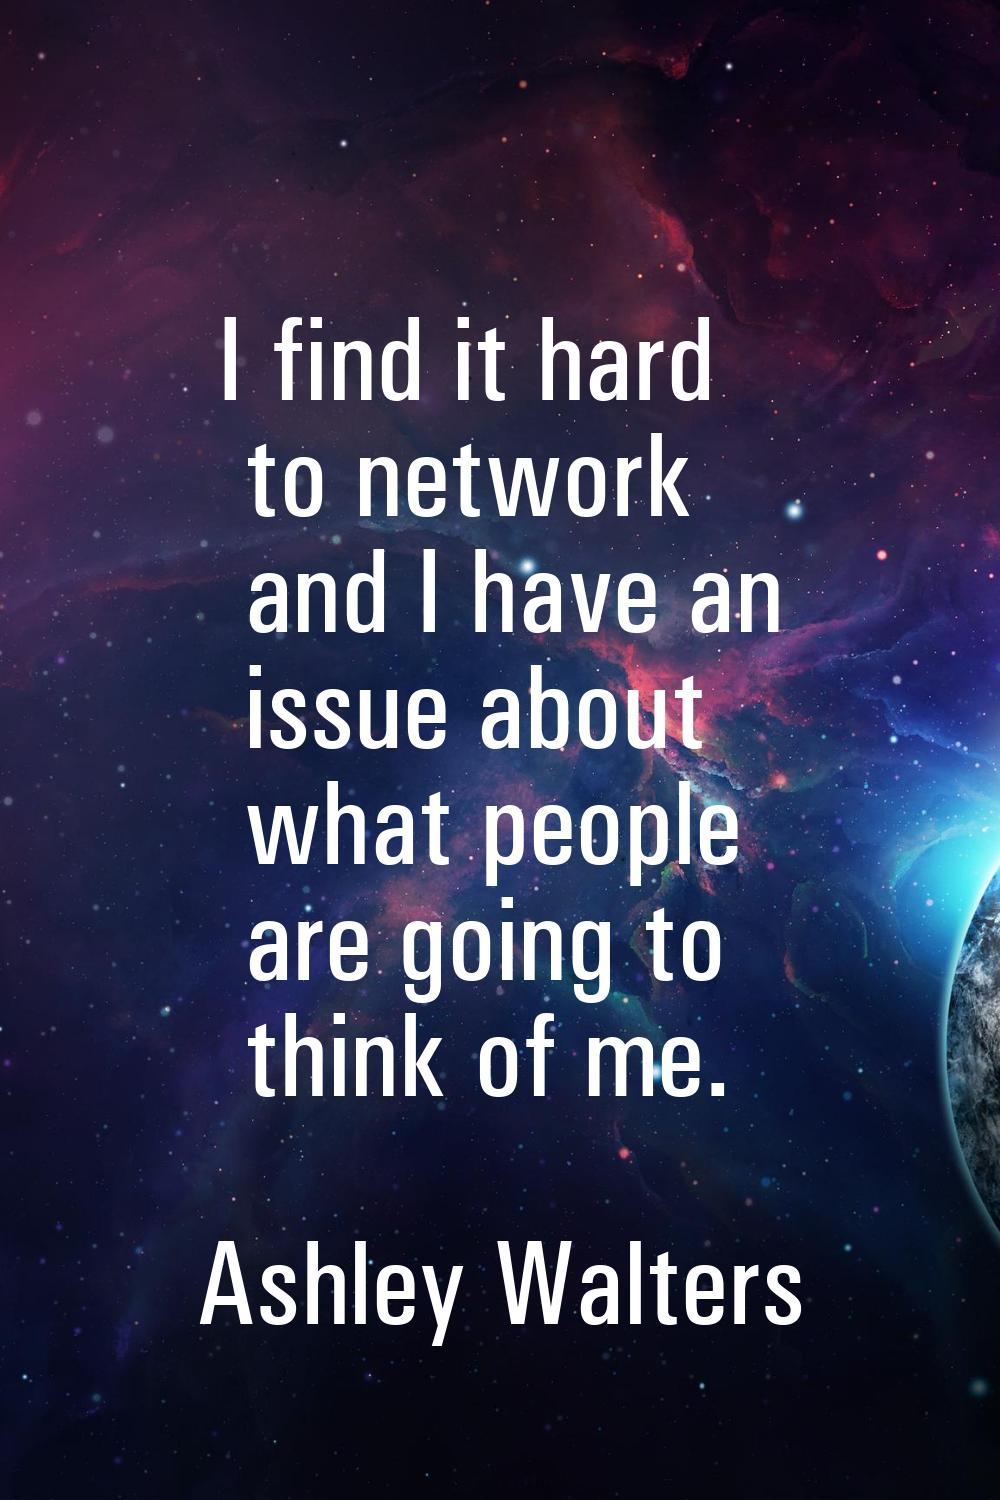 I find it hard to network and I have an issue about what people are going to think of me.